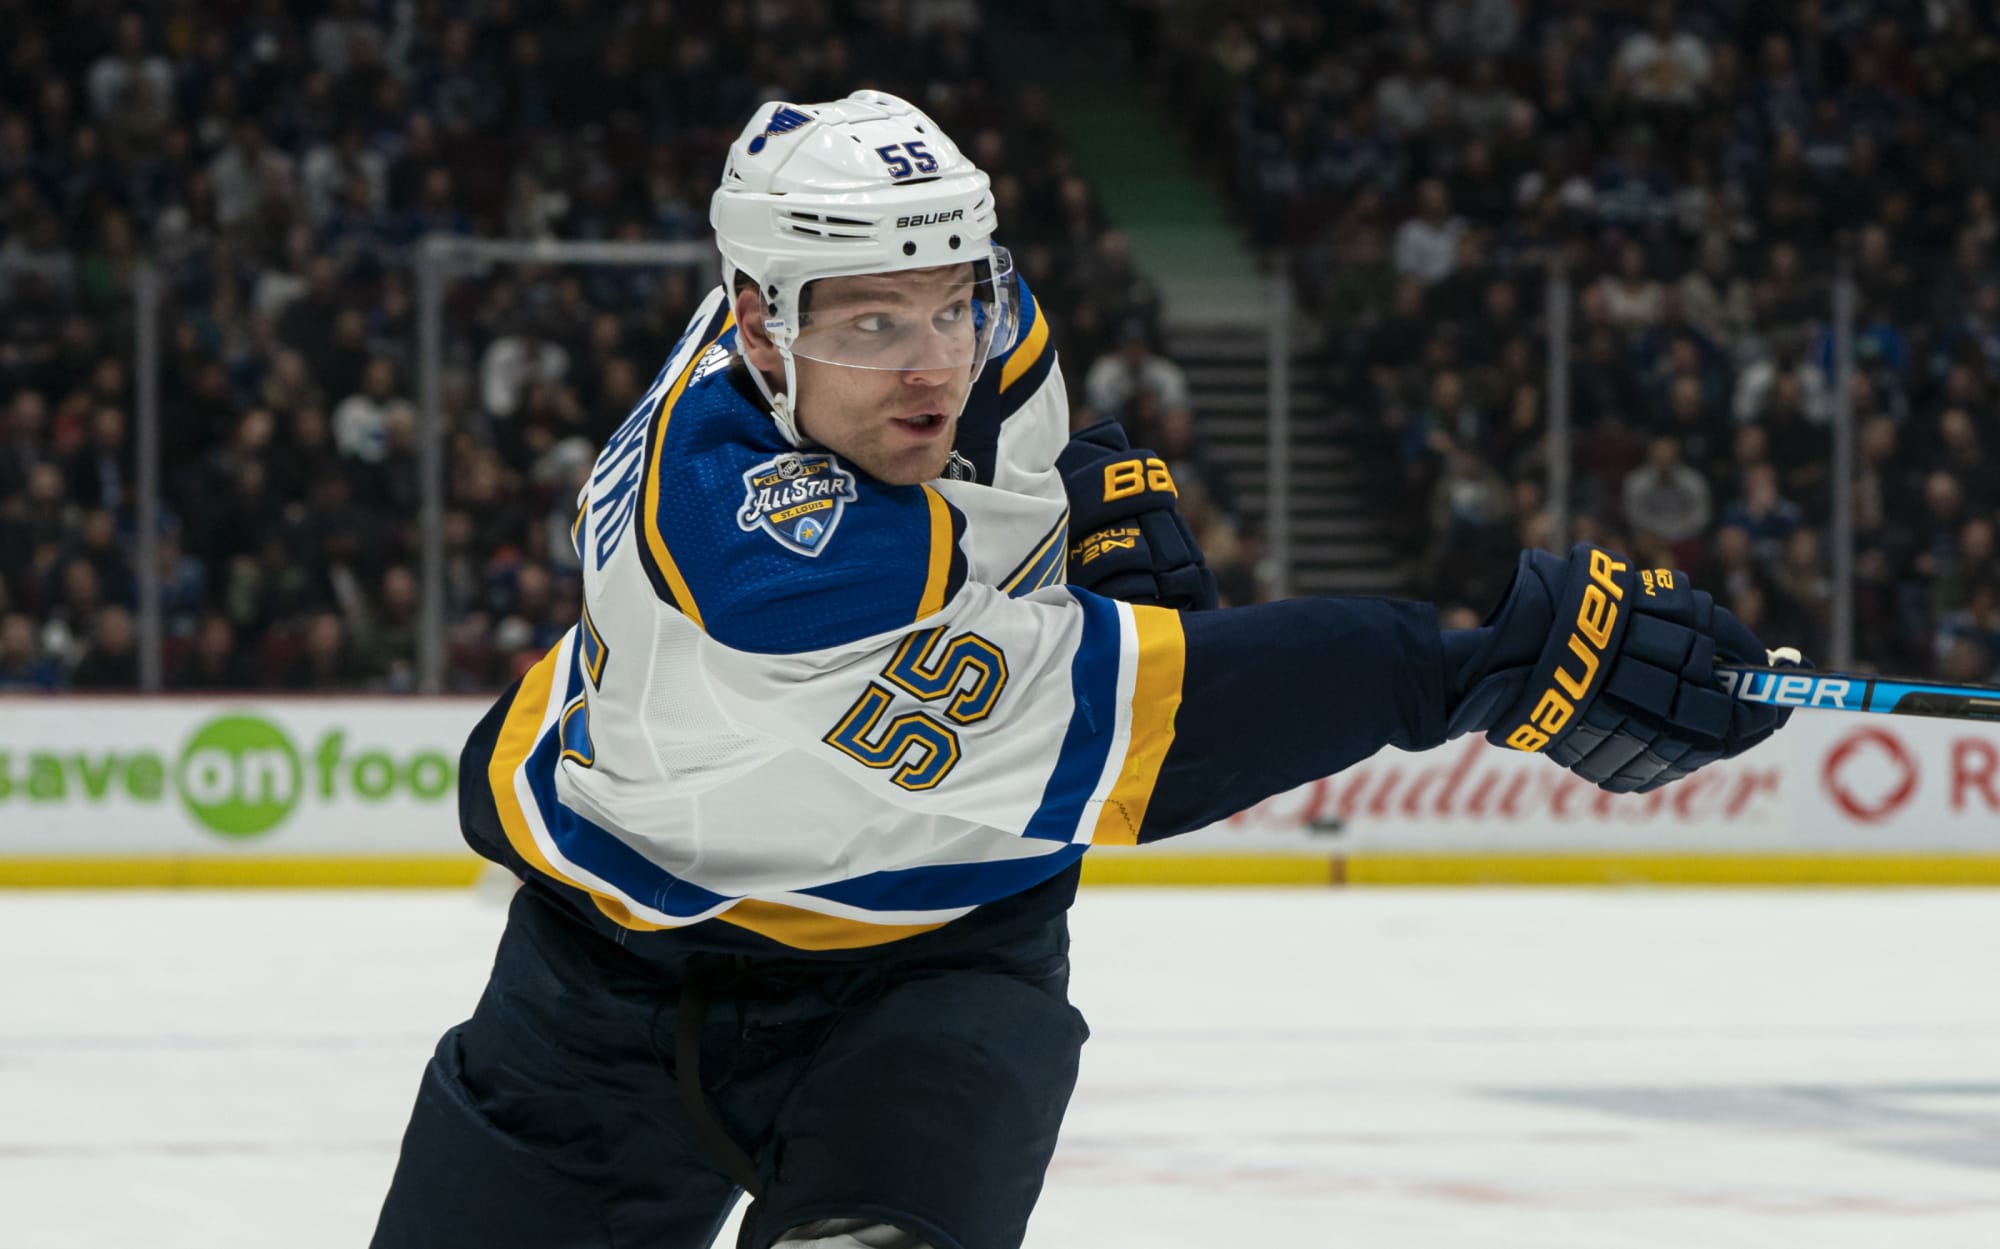 St. Louis Blues Colton Parayko Is Ready To Be The Top Dog